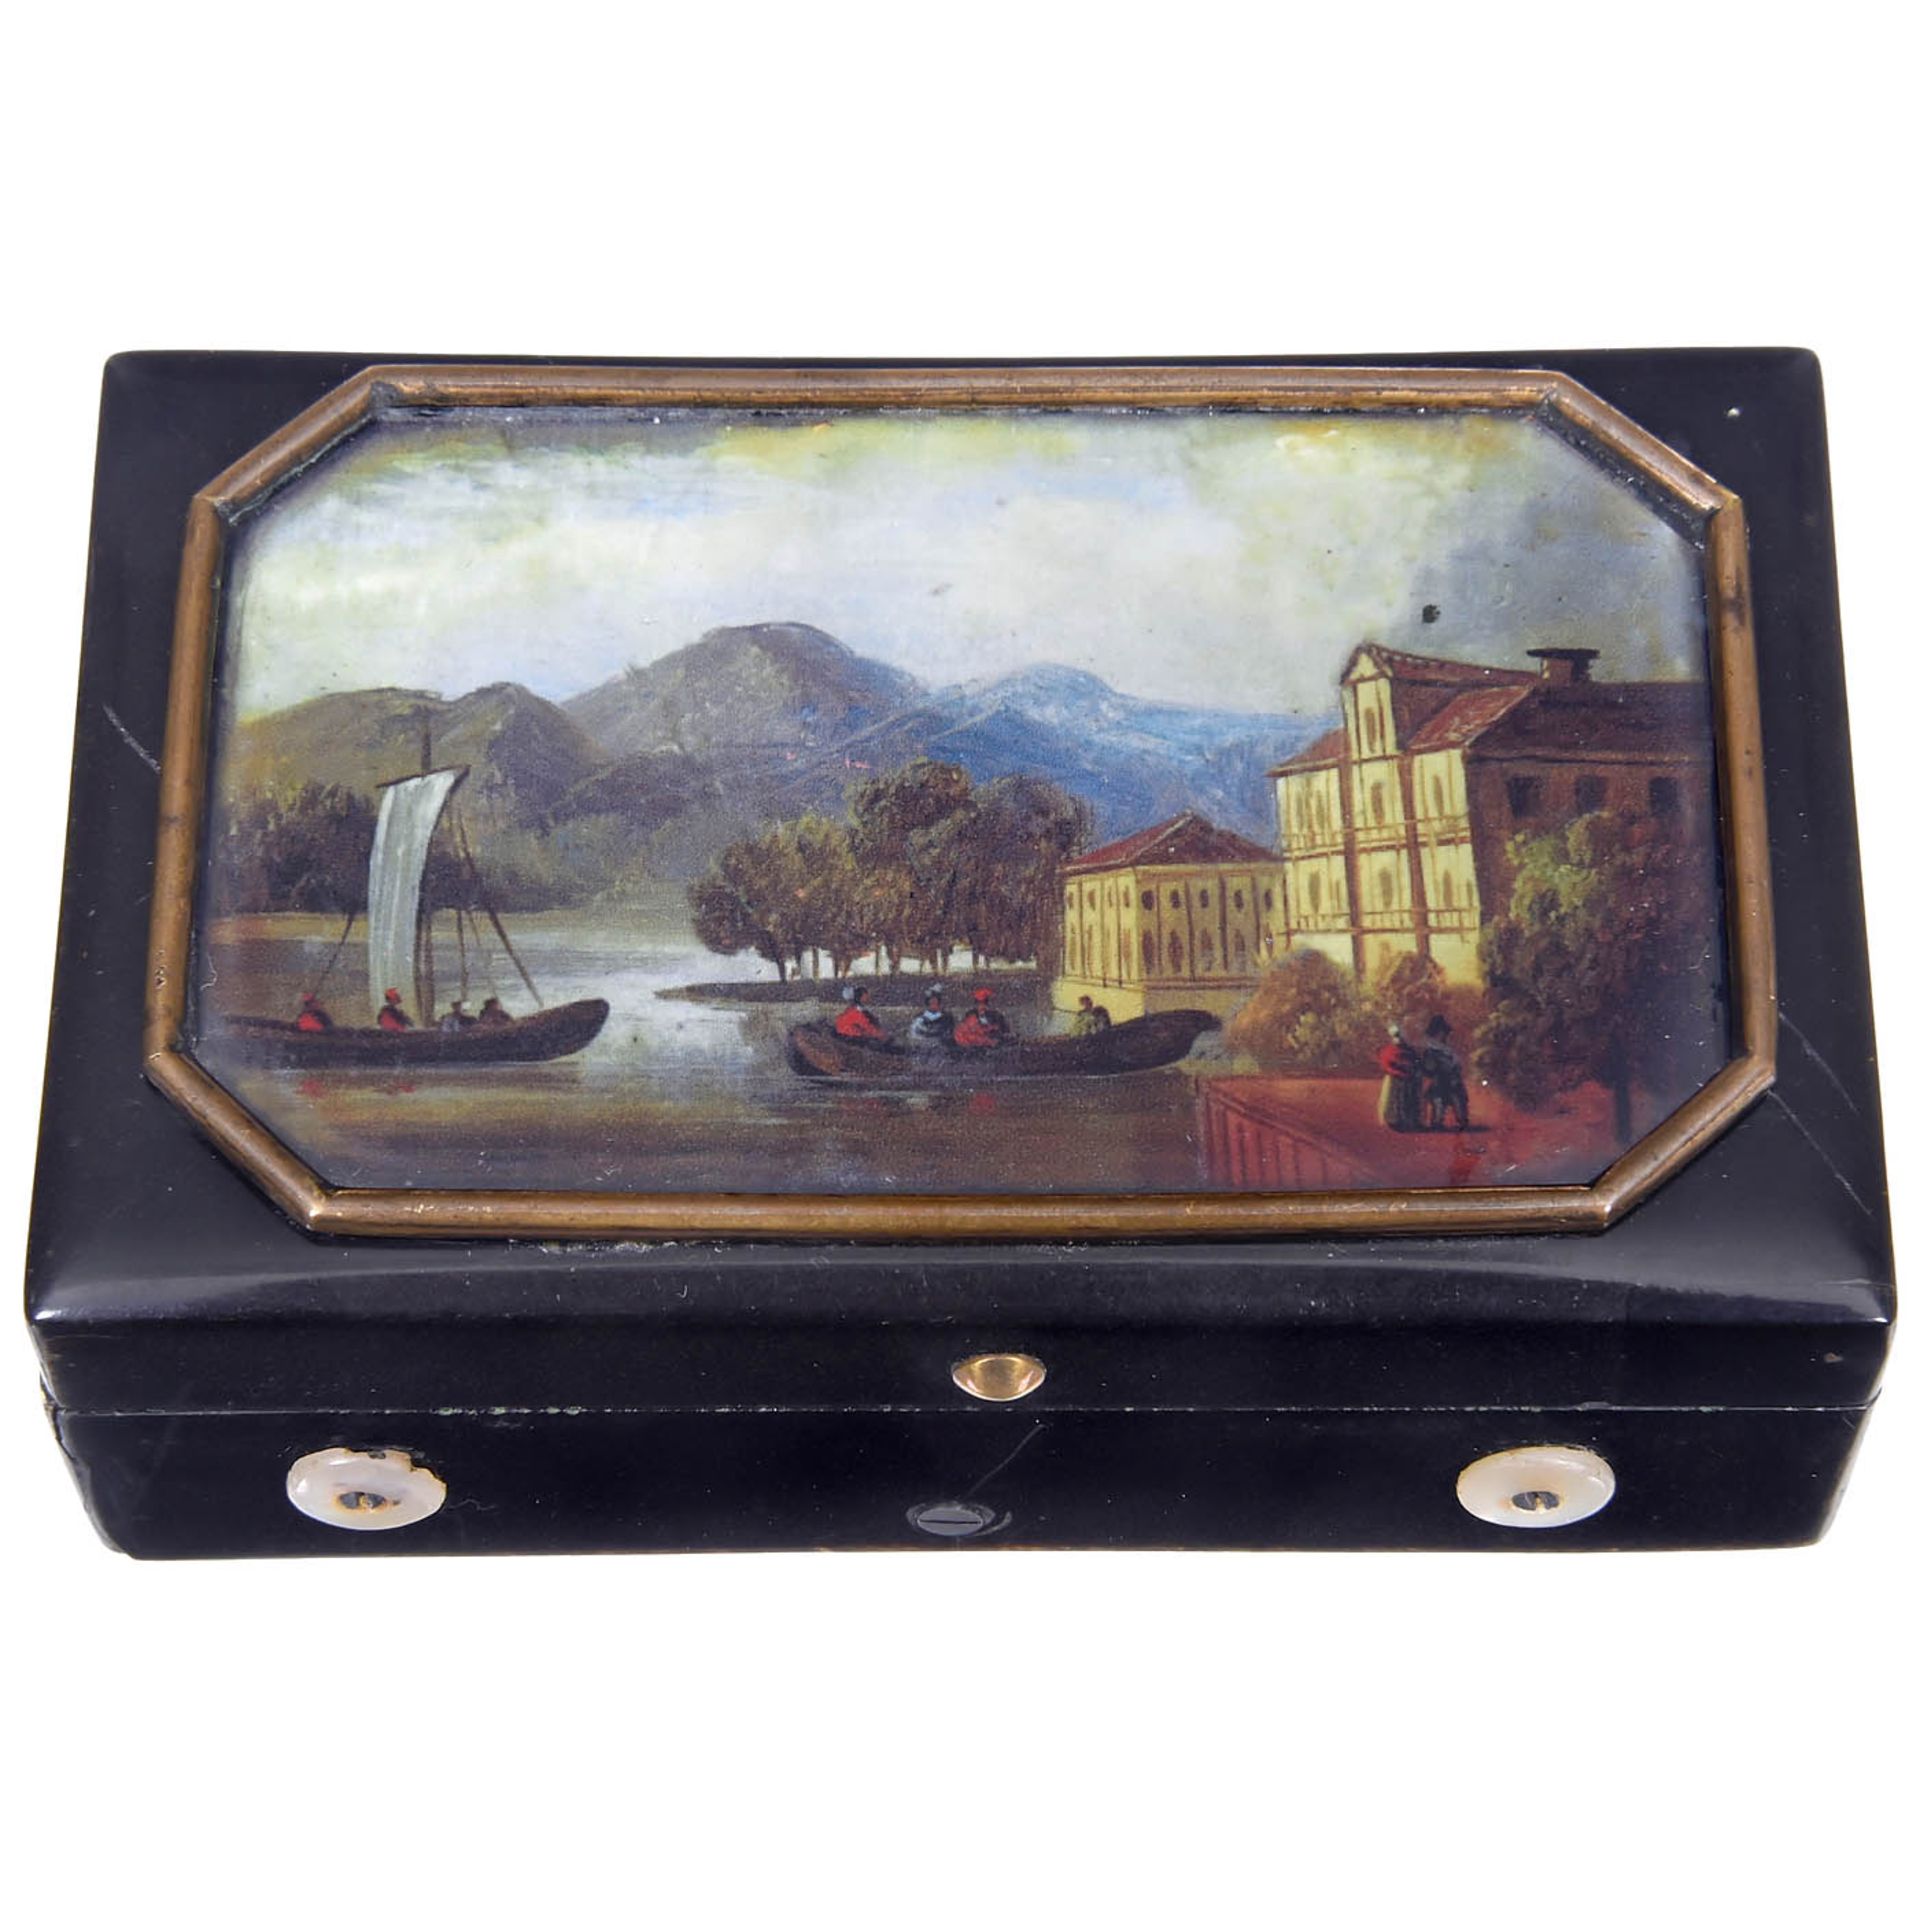 Part-Overture Musical Snuff Box, c. 1850 - Image 3 of 4